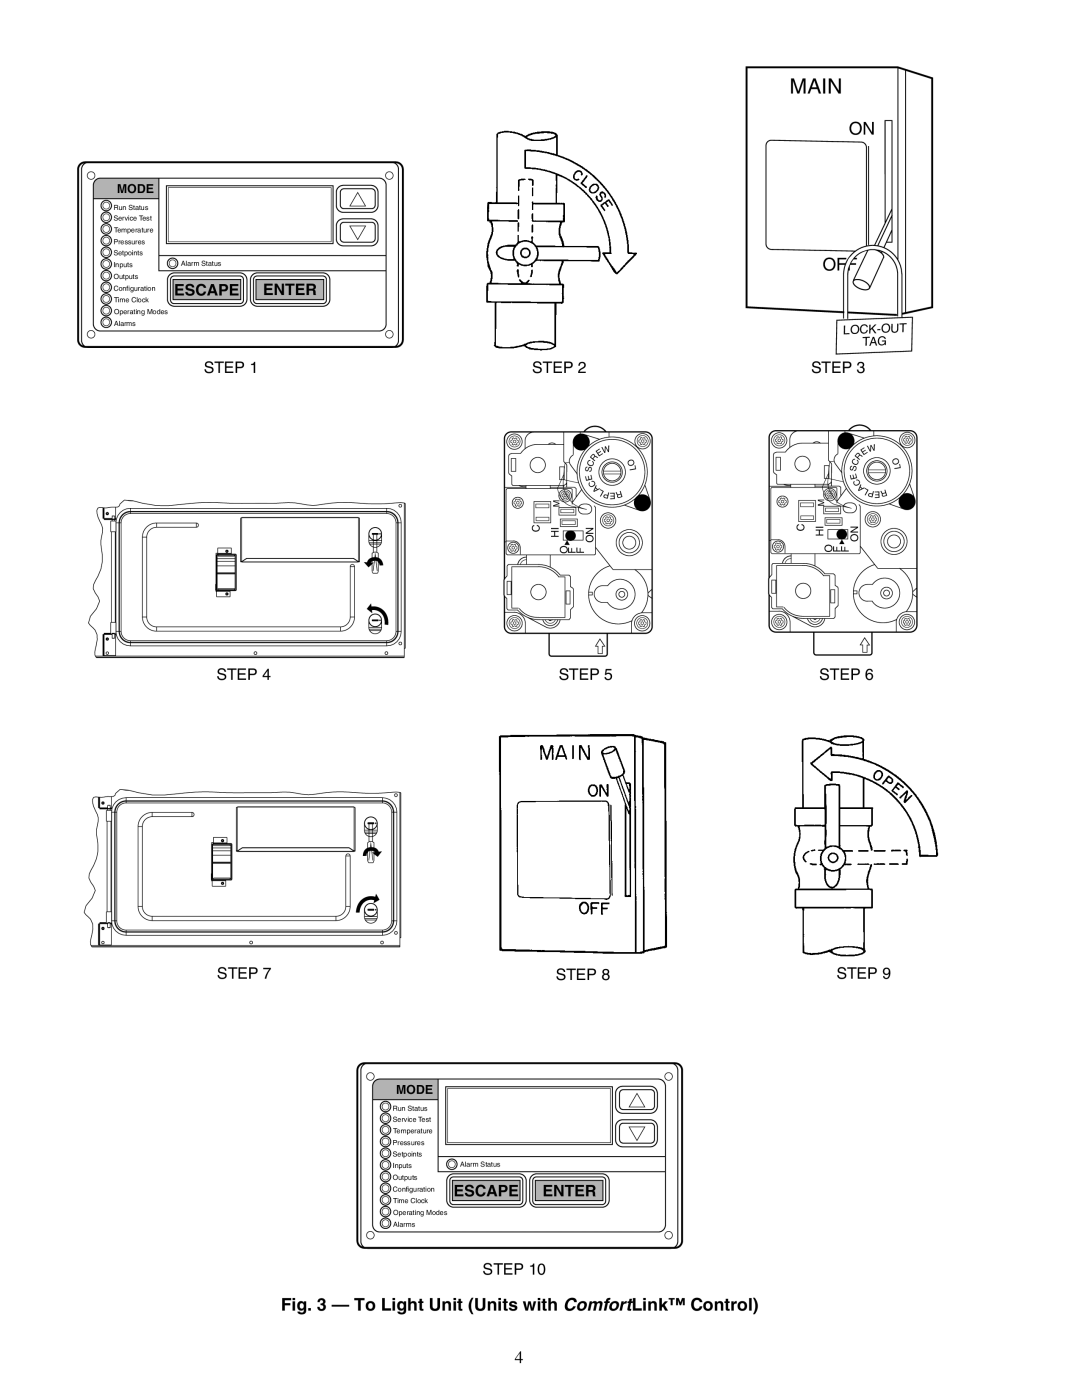 Carrier 48PG03---16 specifications Main, On Off, Enter, Escapeenter, Mode 